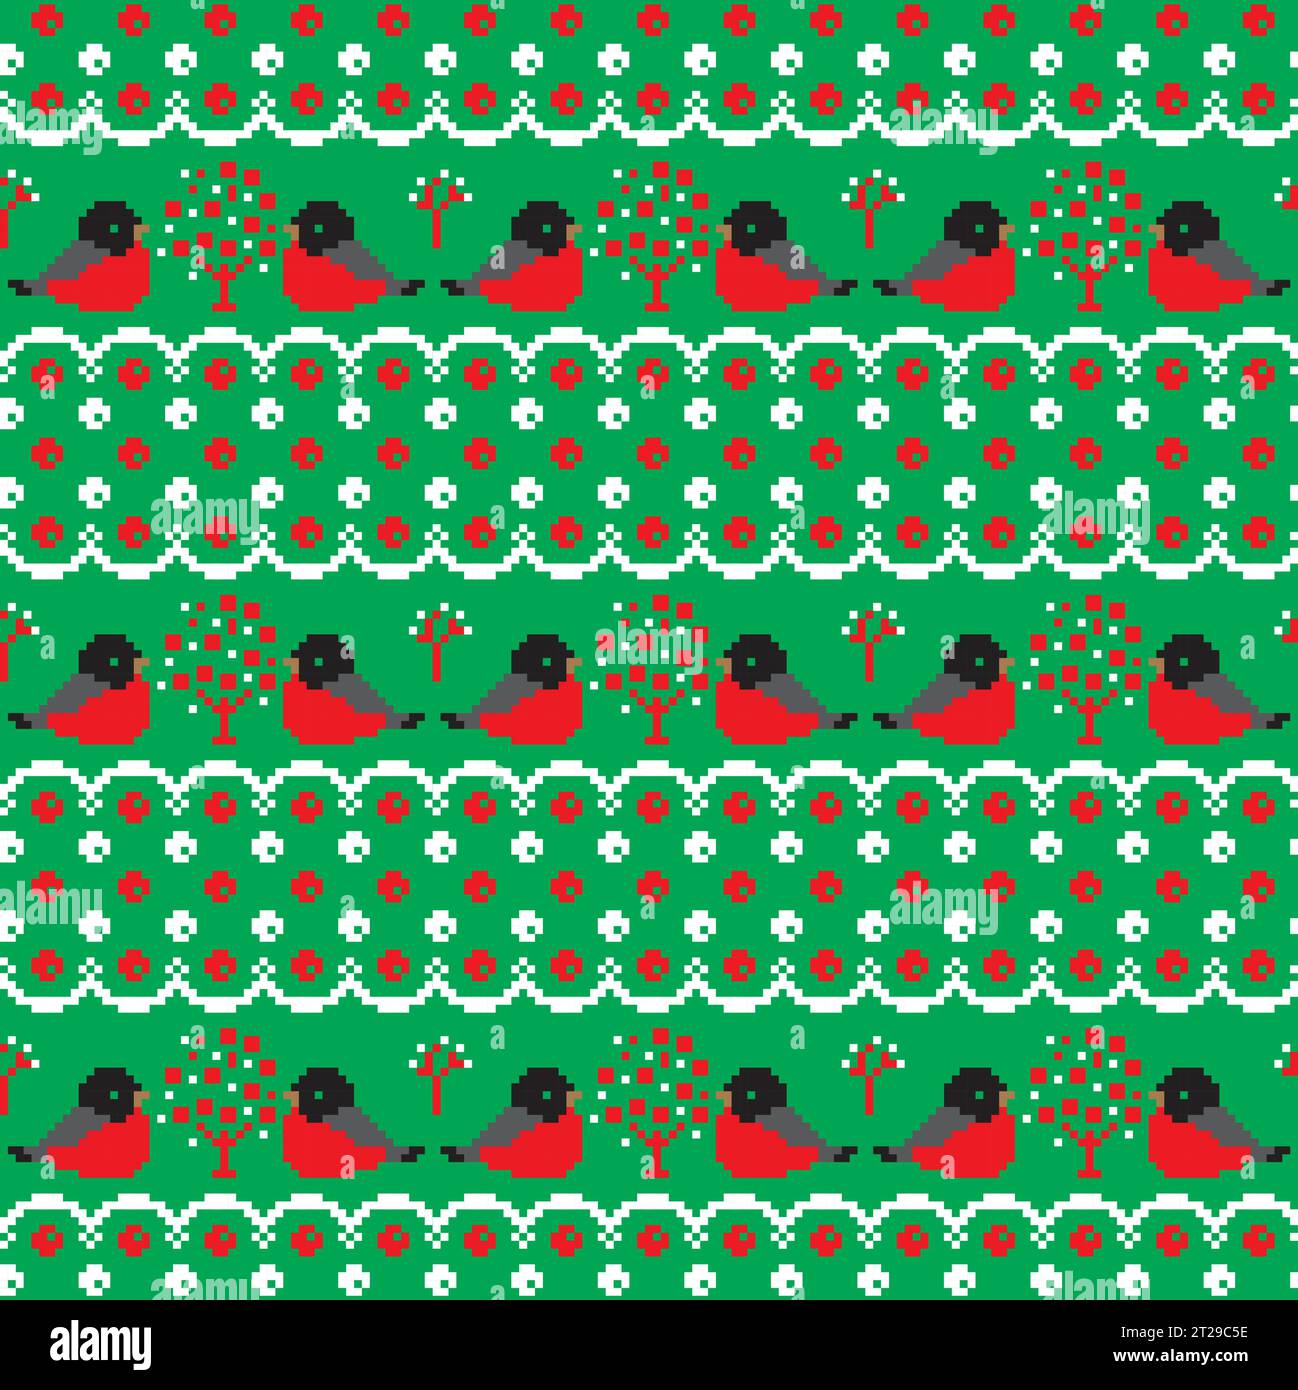 New Year's Christmas pattern pixel Stock Vector